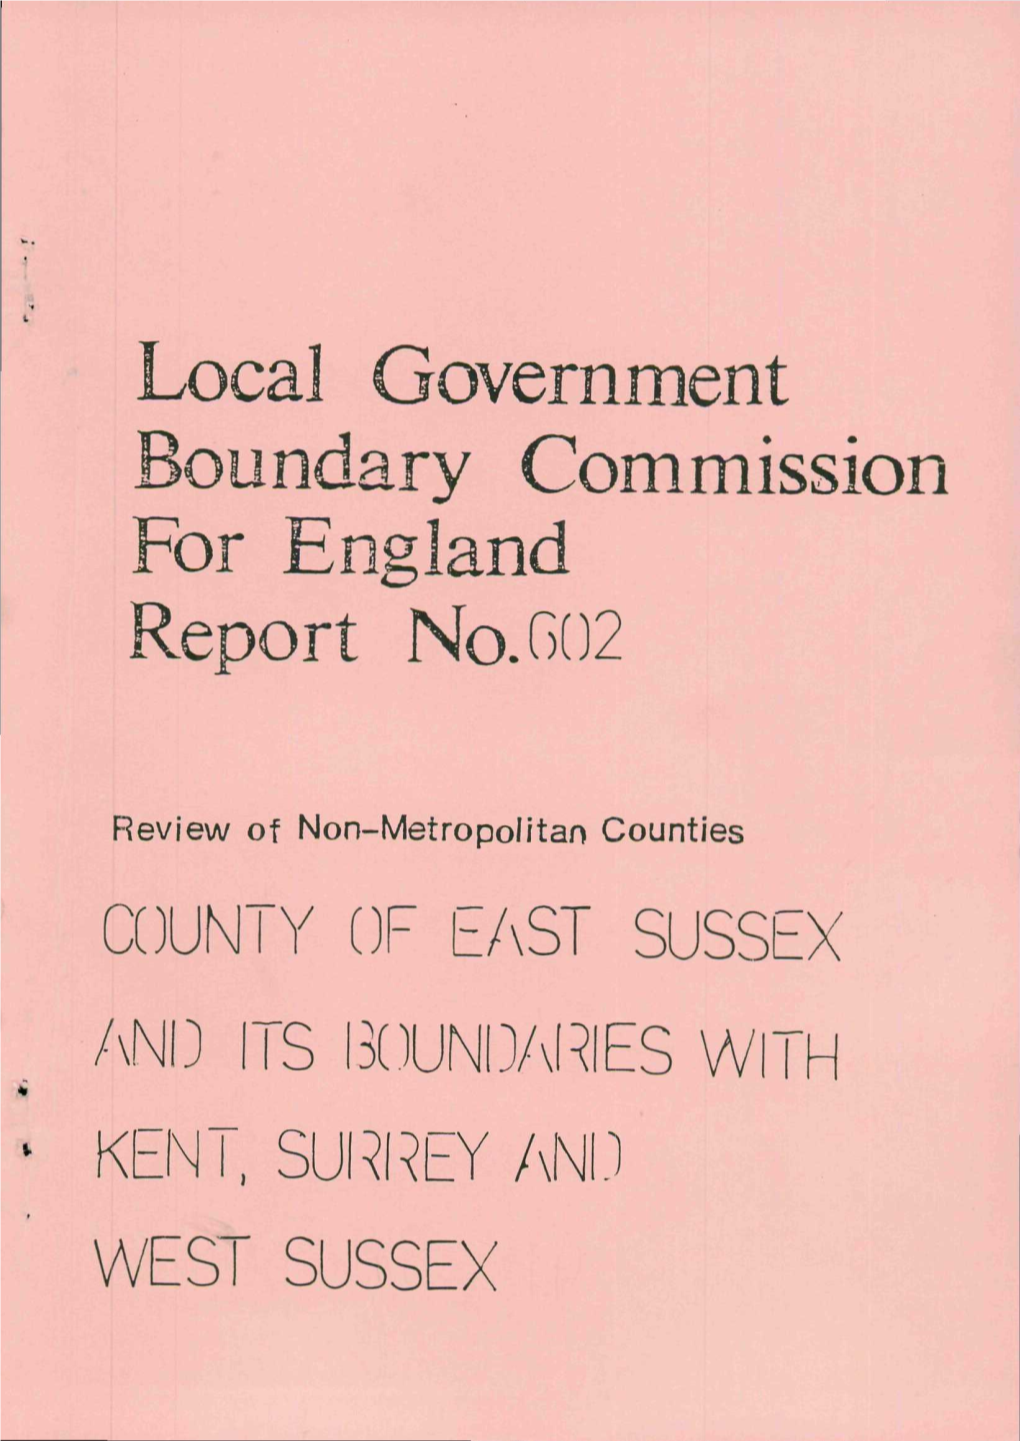 COUNTY of EAST SUSSEX and ~S BOUNDARIES Kbn , SURREY an ES SUSS LOCAL GQVEHKUZWT